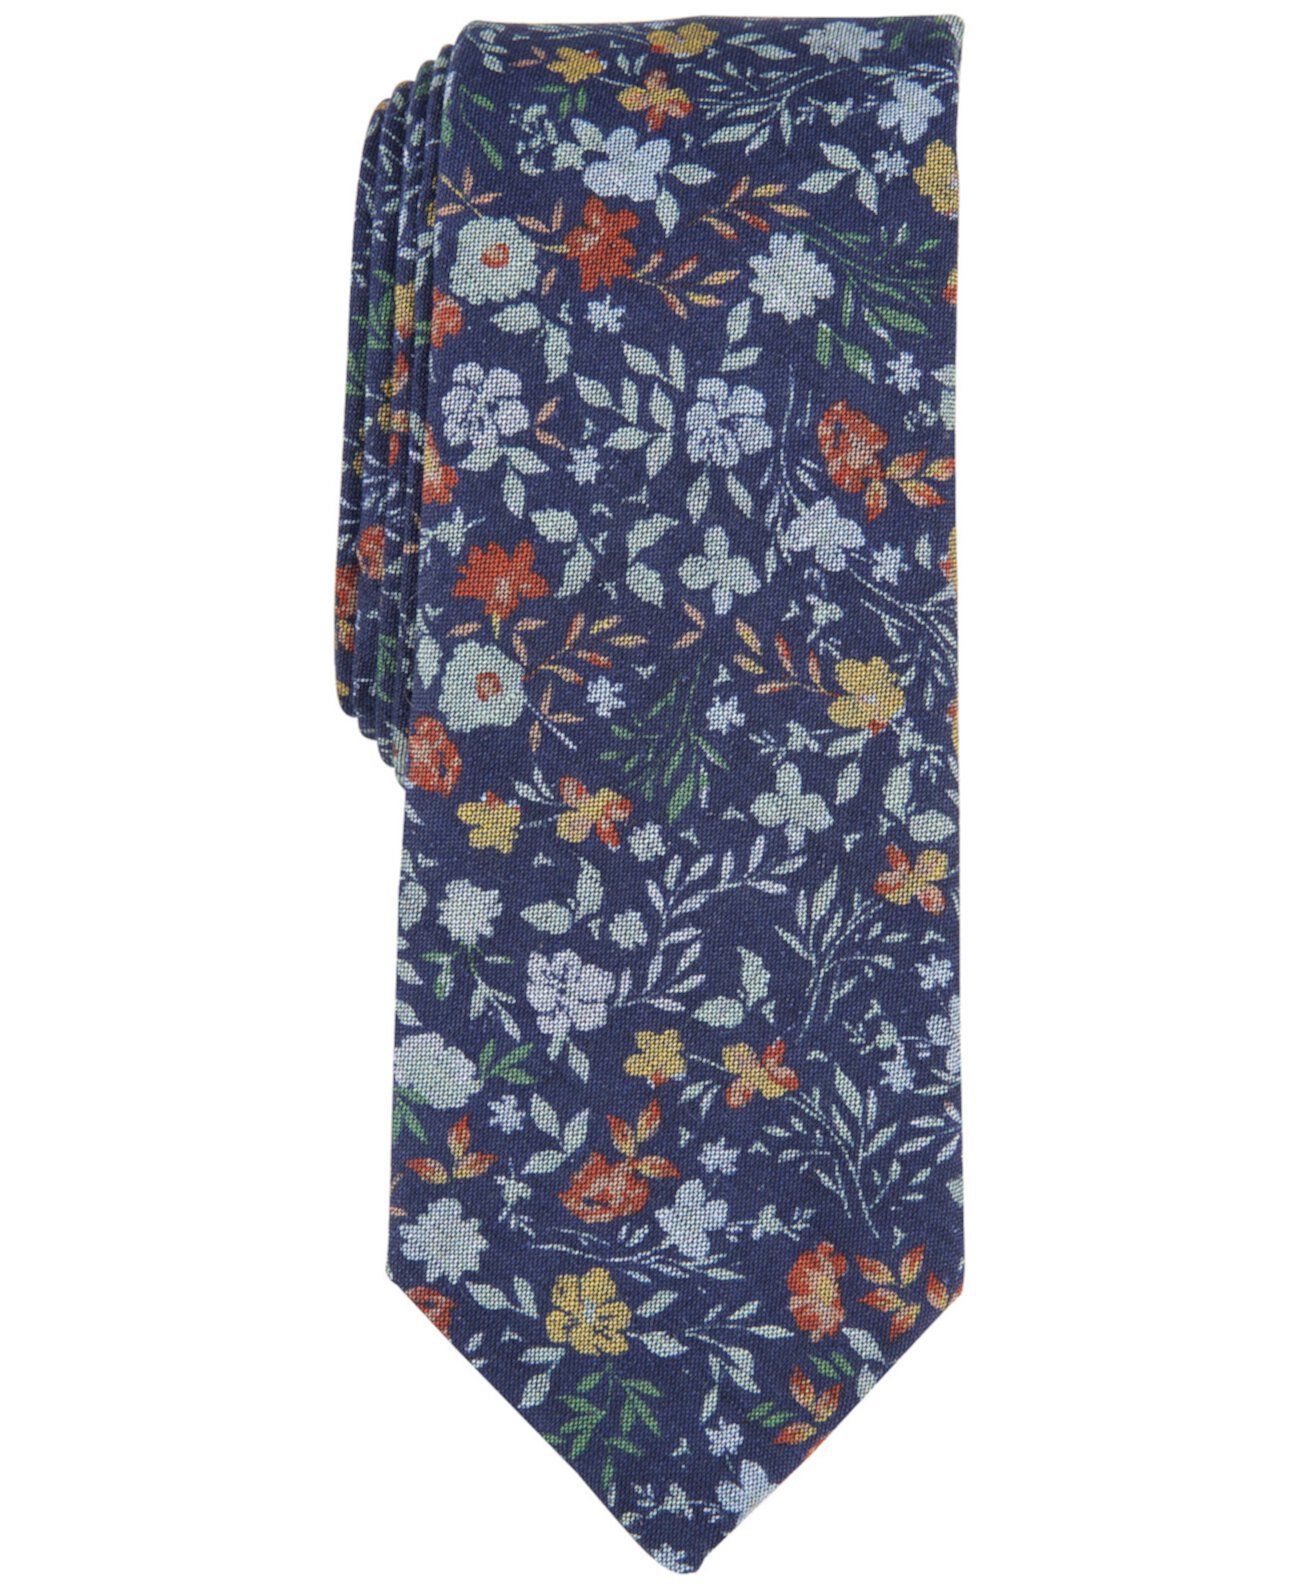 Men's Atkinson Floral Tie, Created for Macy's Bar III